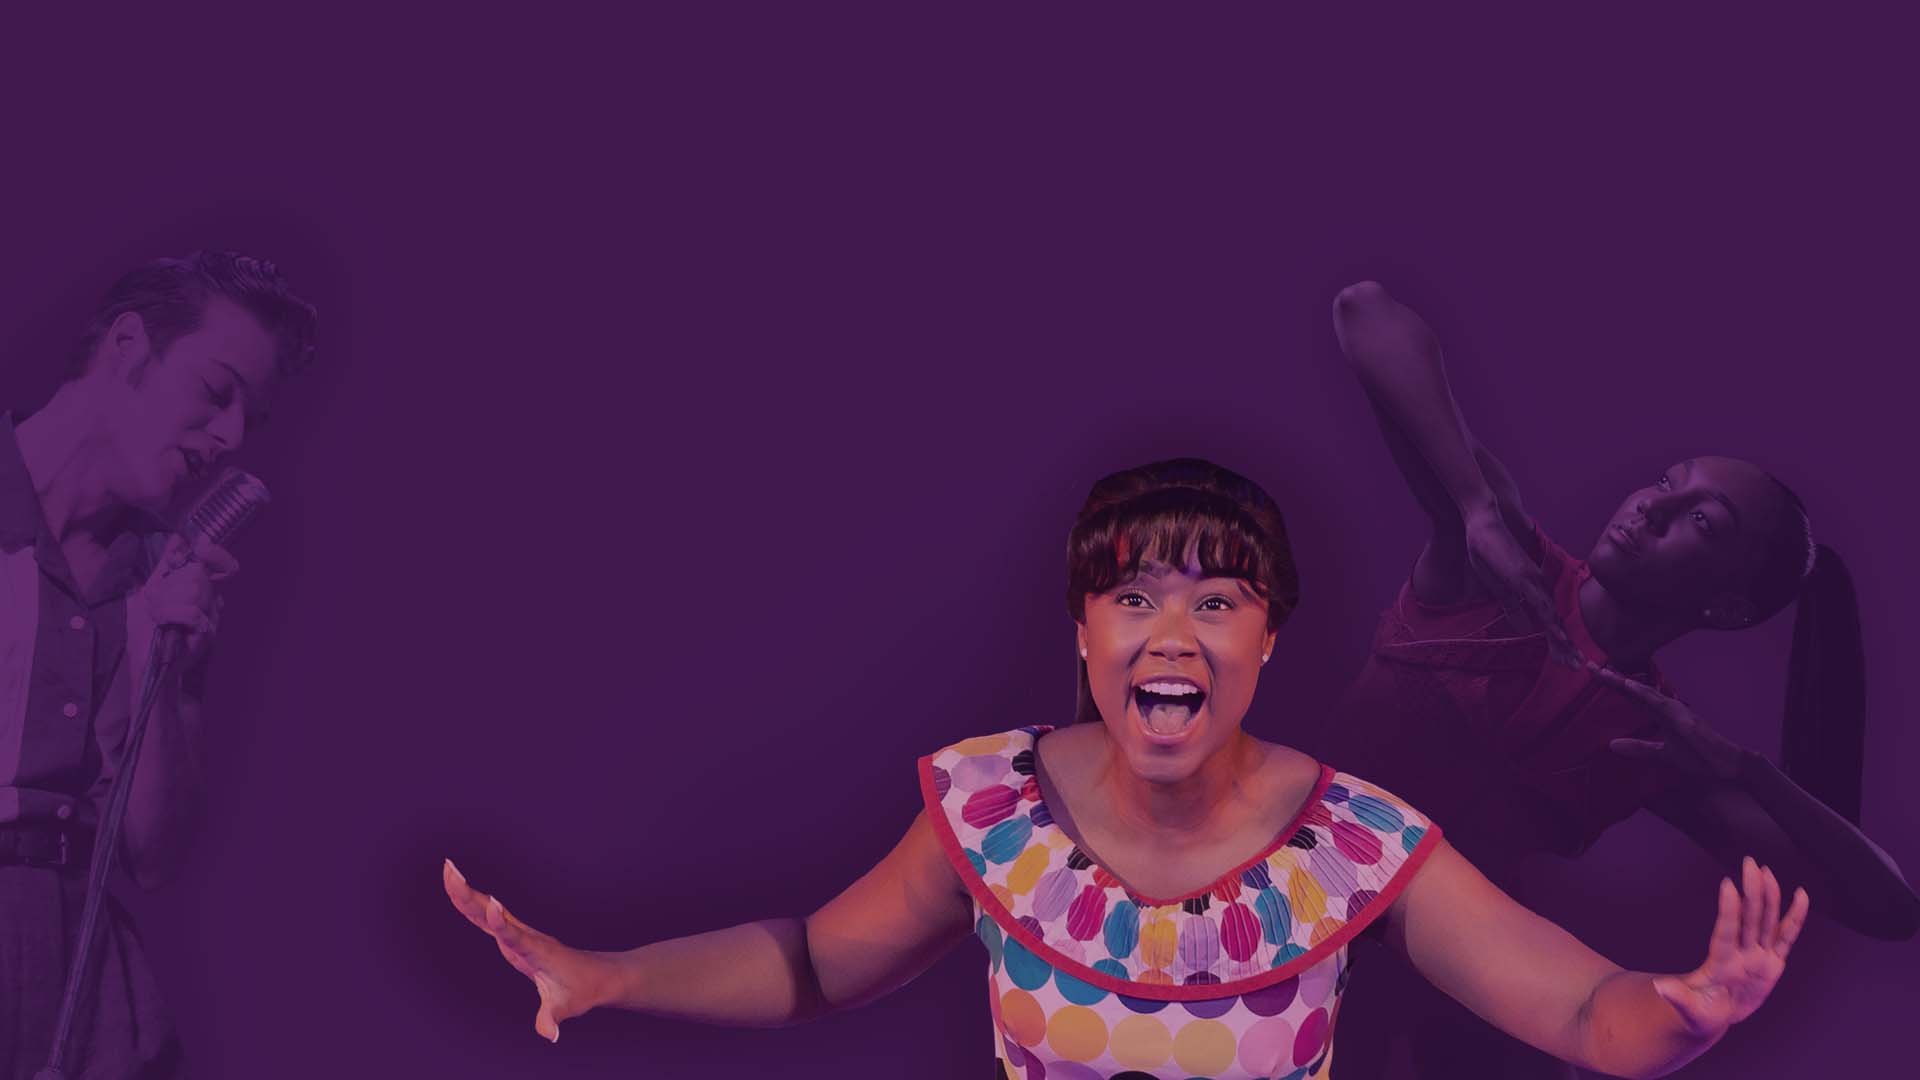 Ailey II, Hairspray, and Million Dollar Quartet featured on a purple gradient image